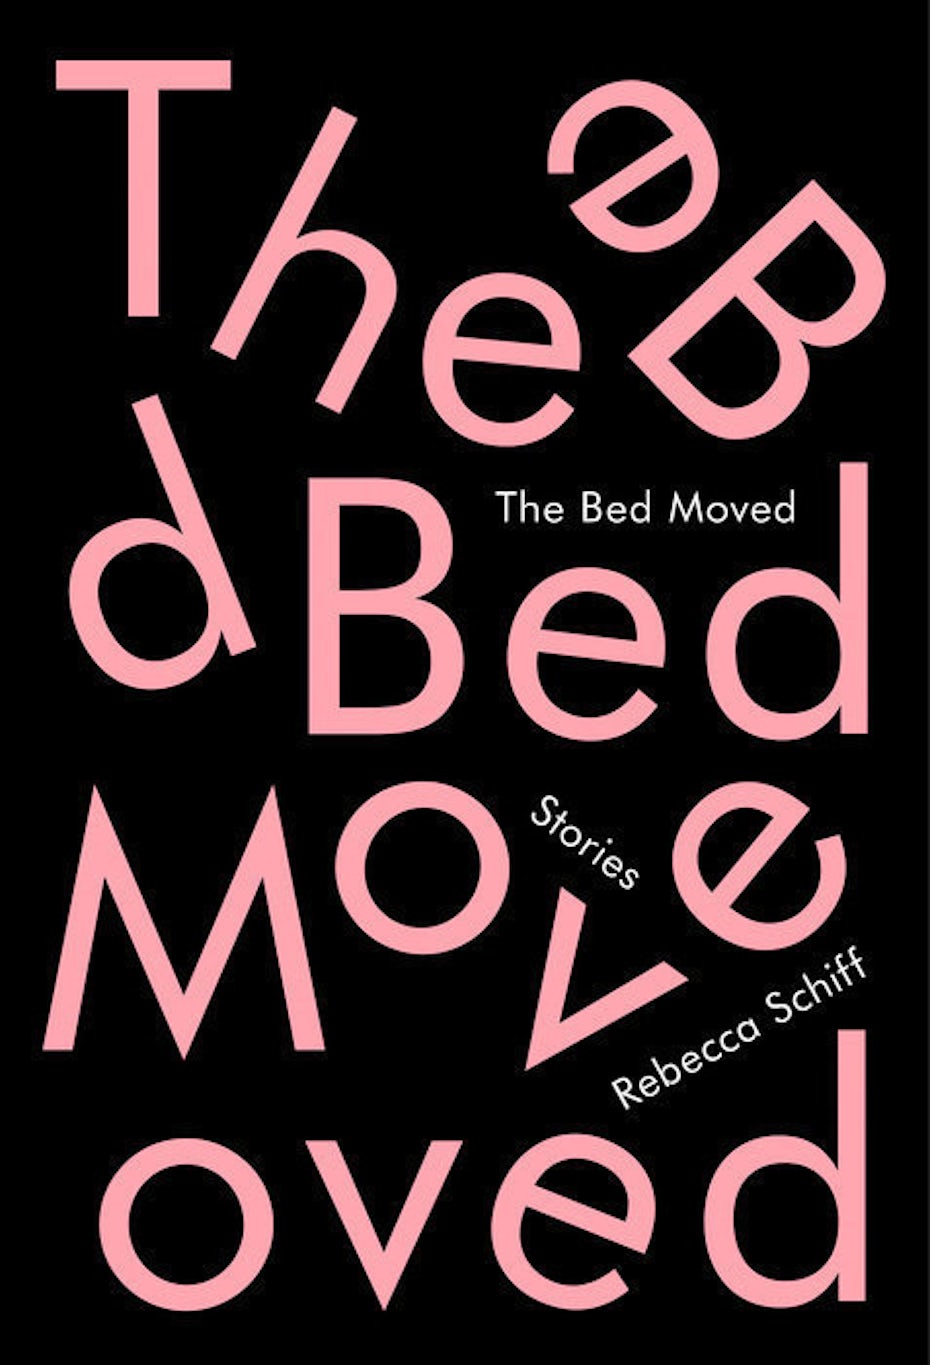 The Bed Moved by Rebecca Schiff, Designed by Janet Hansen